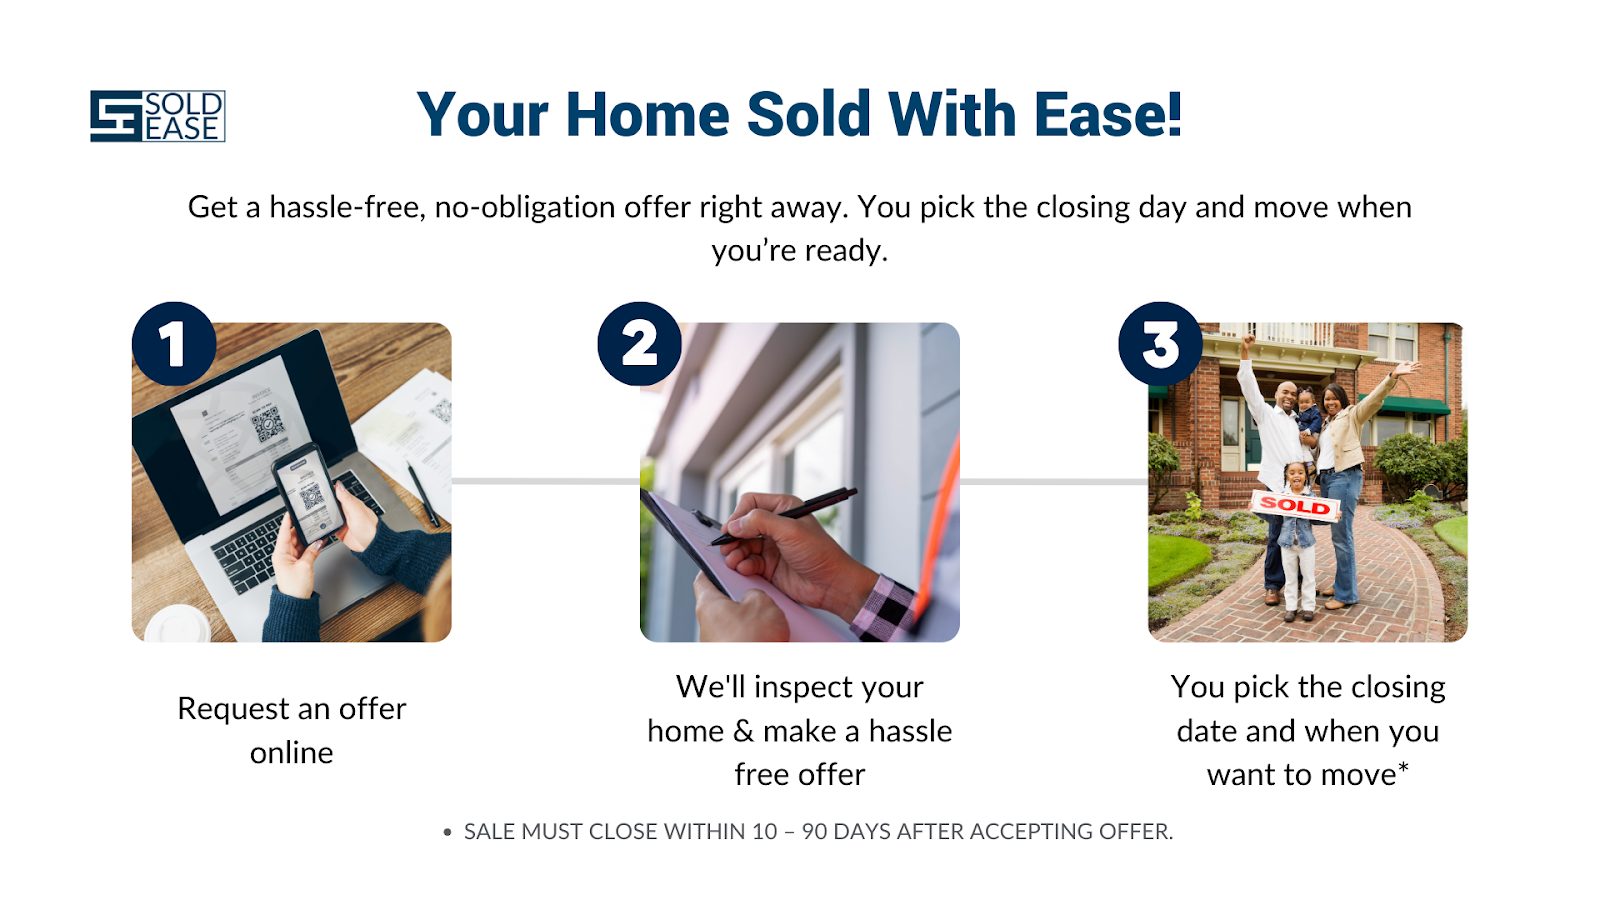 Can You Sell a House in Under a Week?